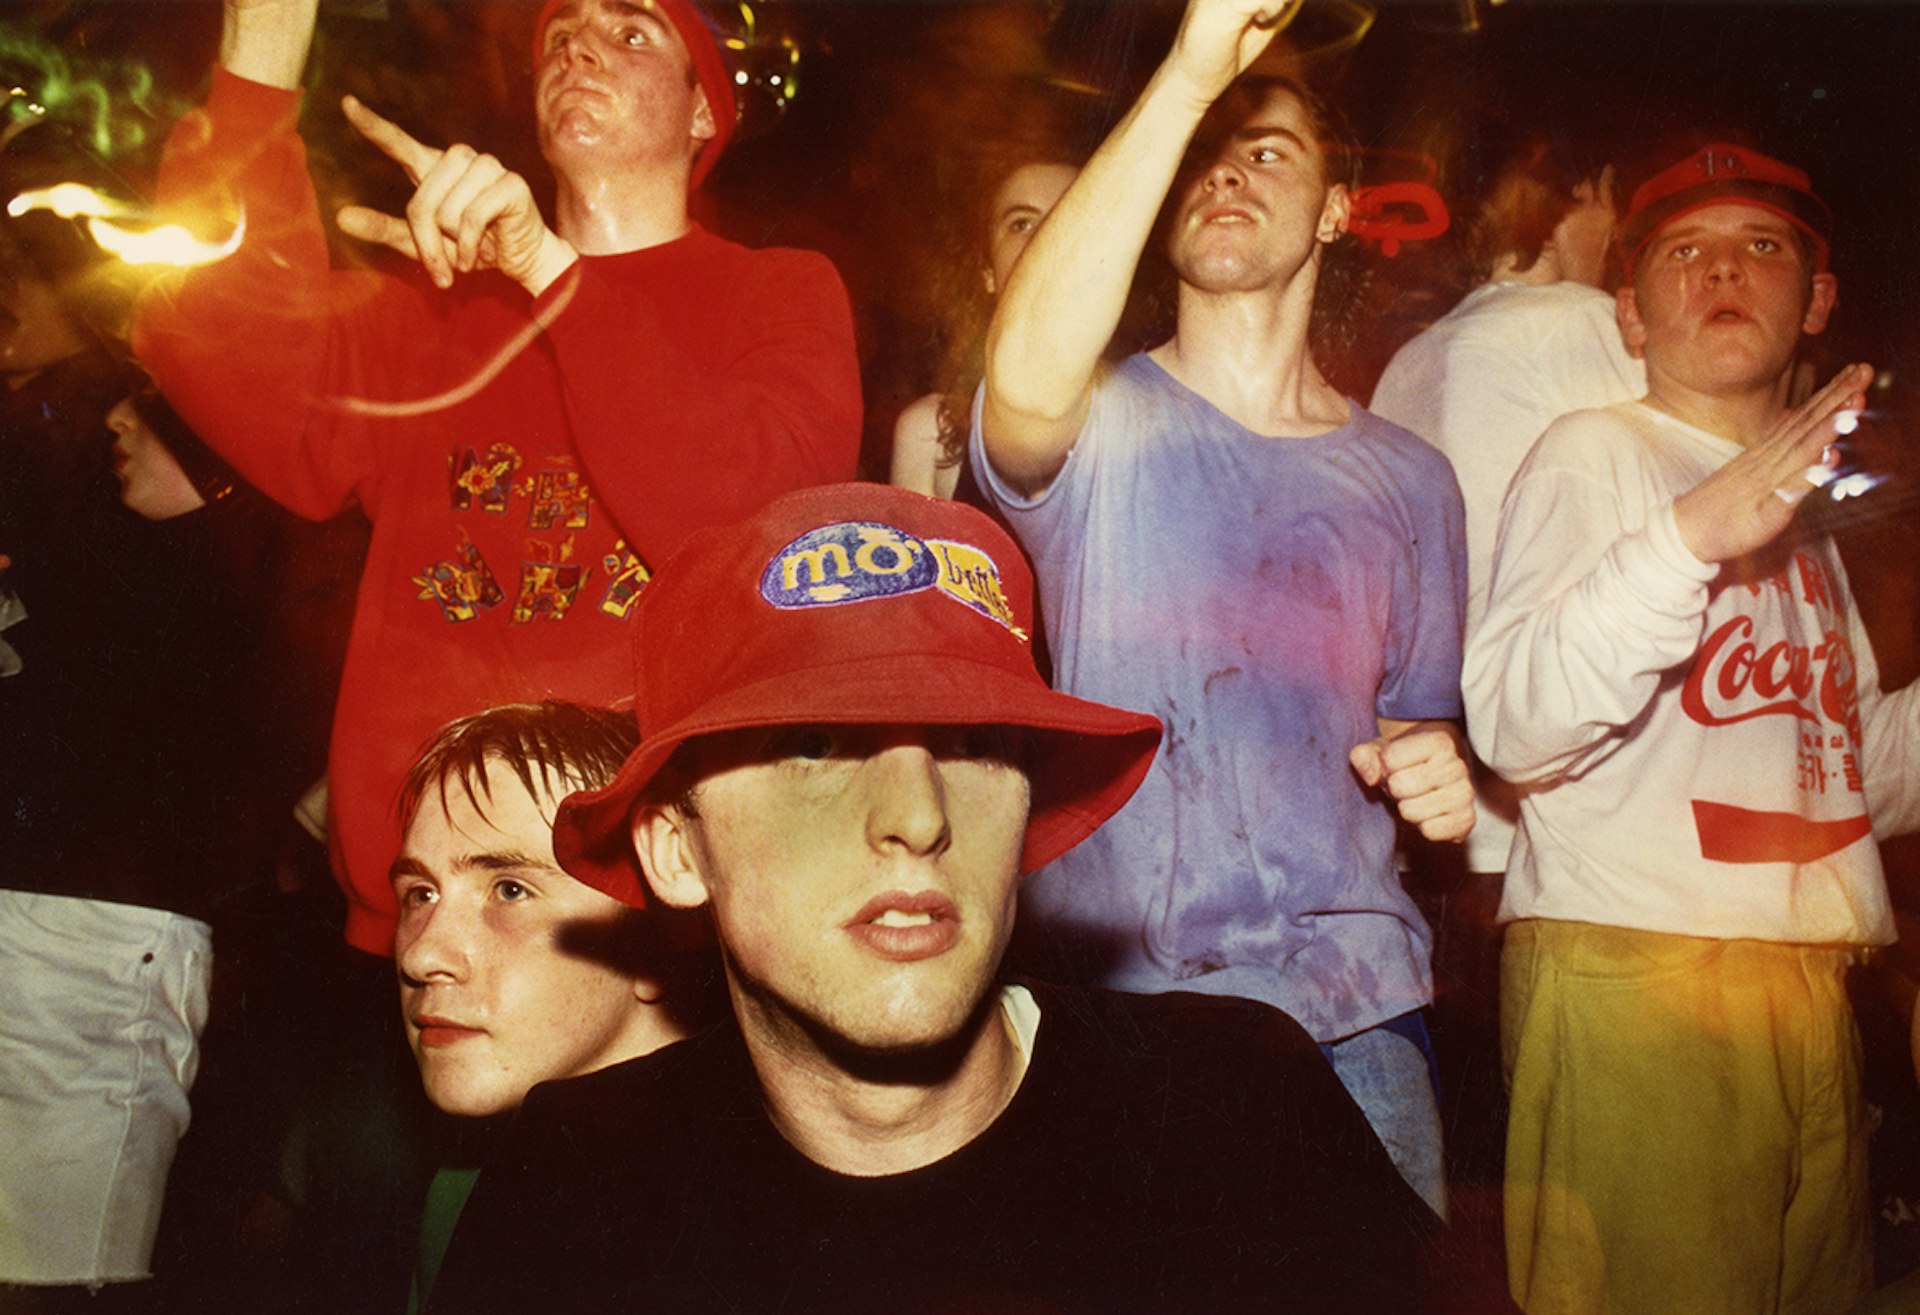 Photos capturing the blissful hedonism of ‘90s rave culture